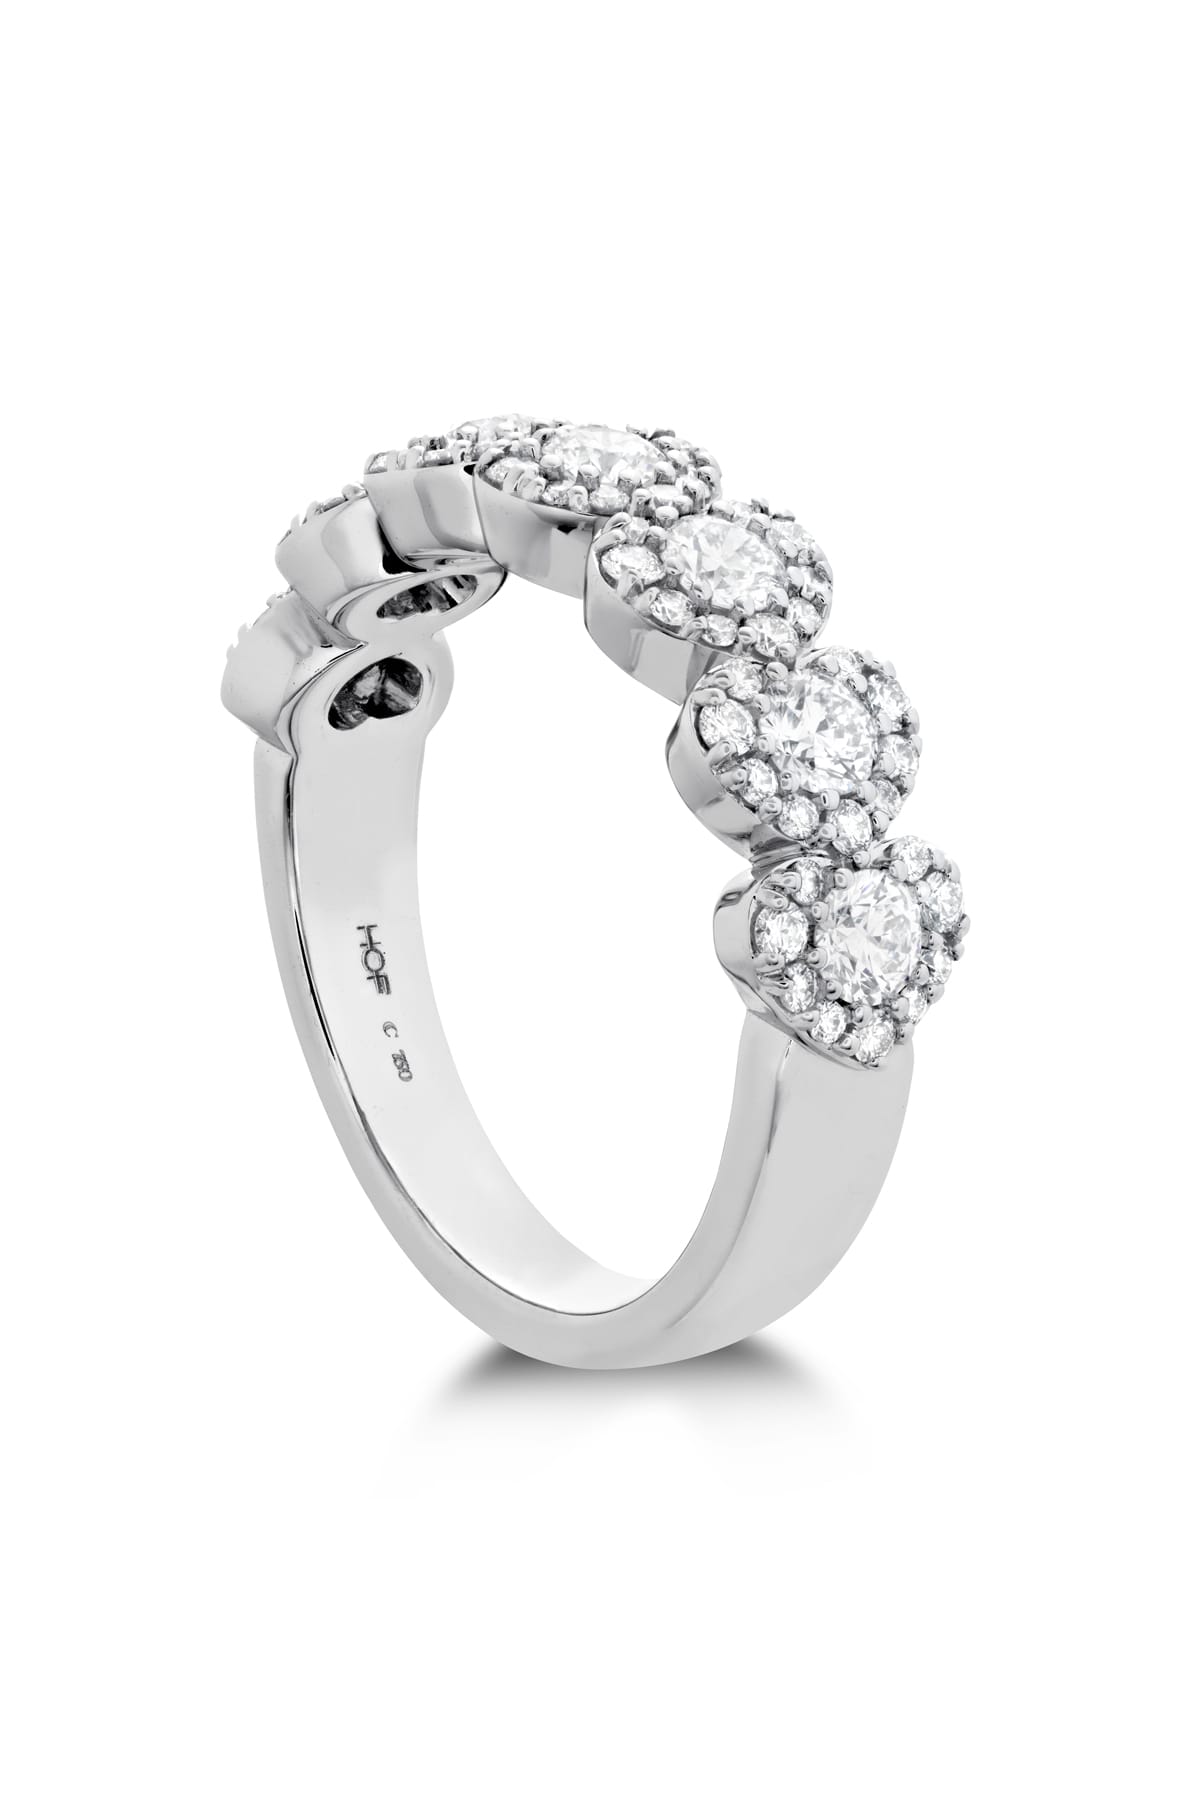 Fulfillment Round Band From Hearts On Fire available at LeGassick Diamonds and Jewellery Gold Coast, Australia.